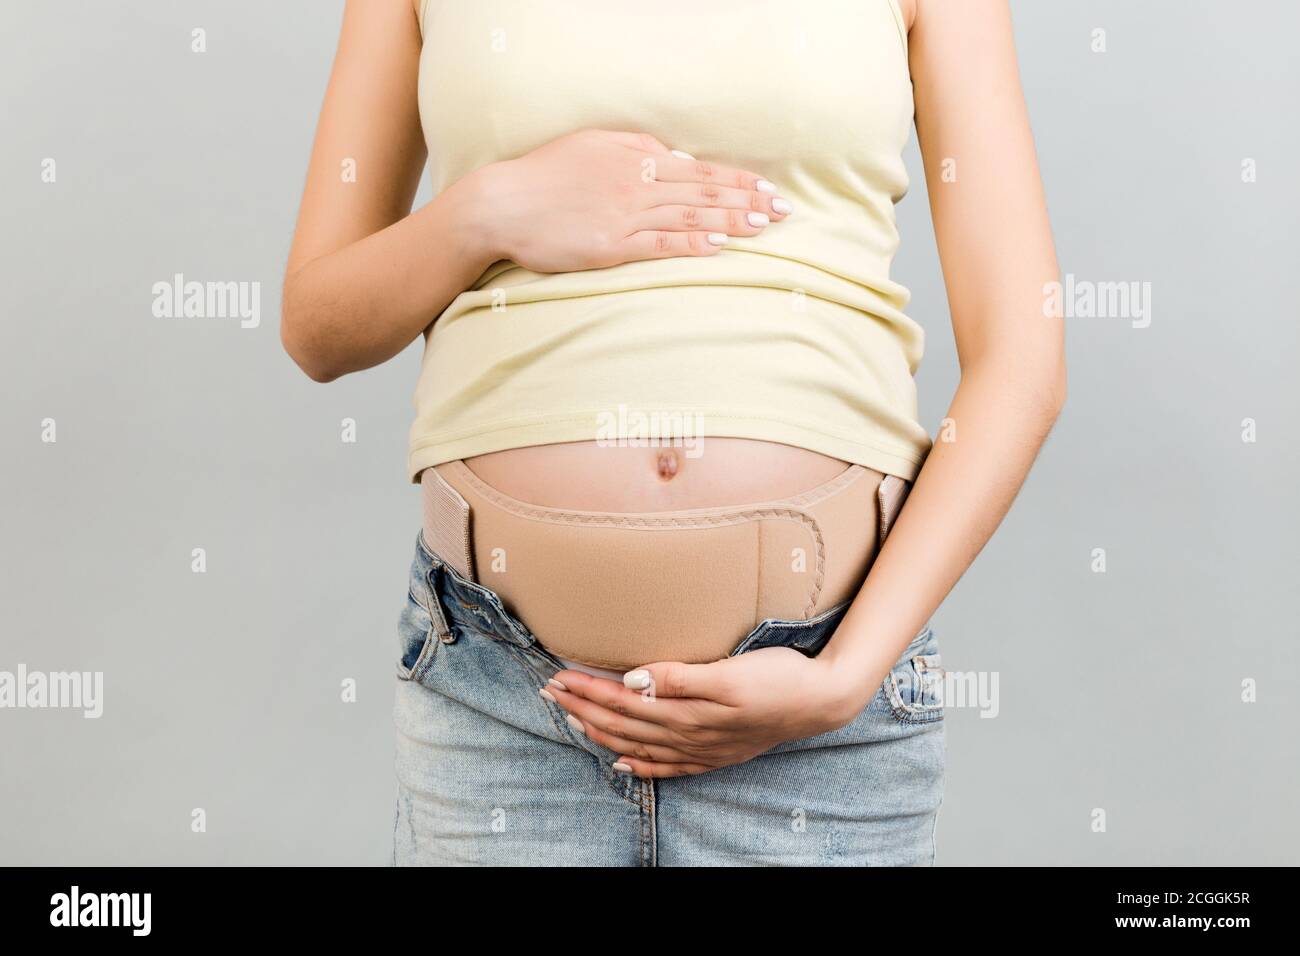 Close up of pregnant woman wearing pregnancy corset against backpain at  gray background with copy space. Orthopedic abdominal support belt concept  Stock Photo - Alamy